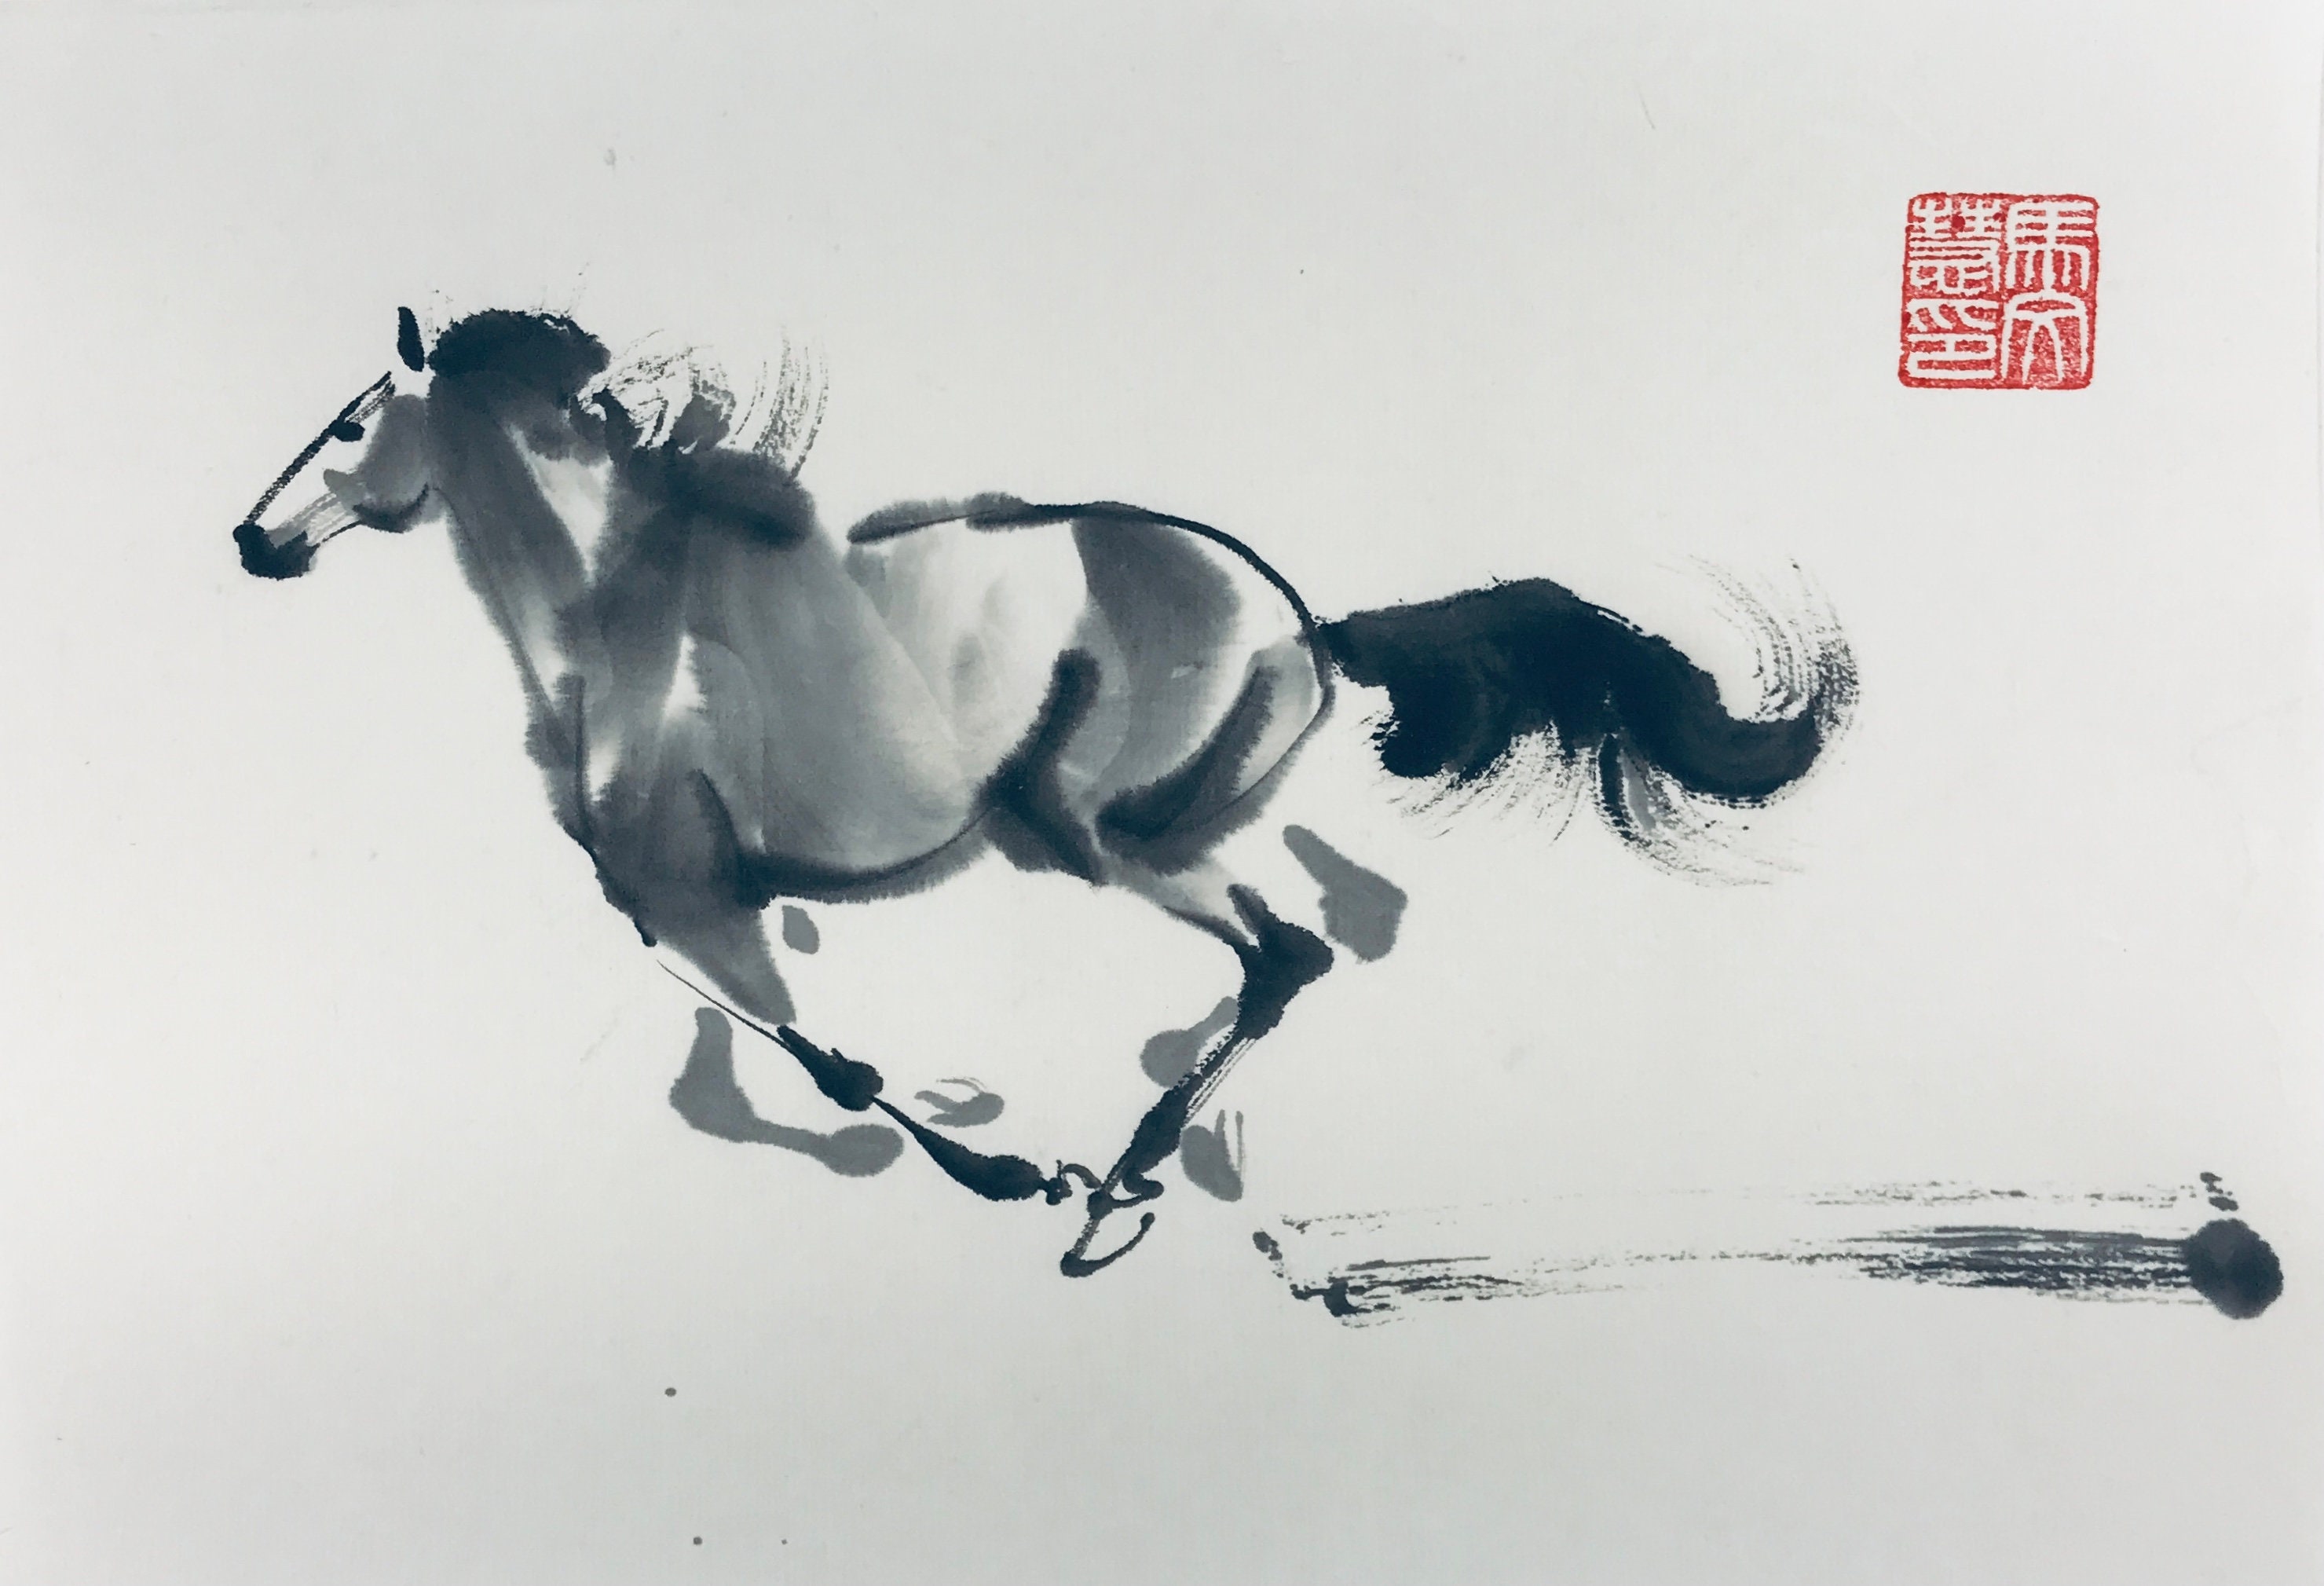 Sumi Ink Horse - I Painting by Debashis Dey